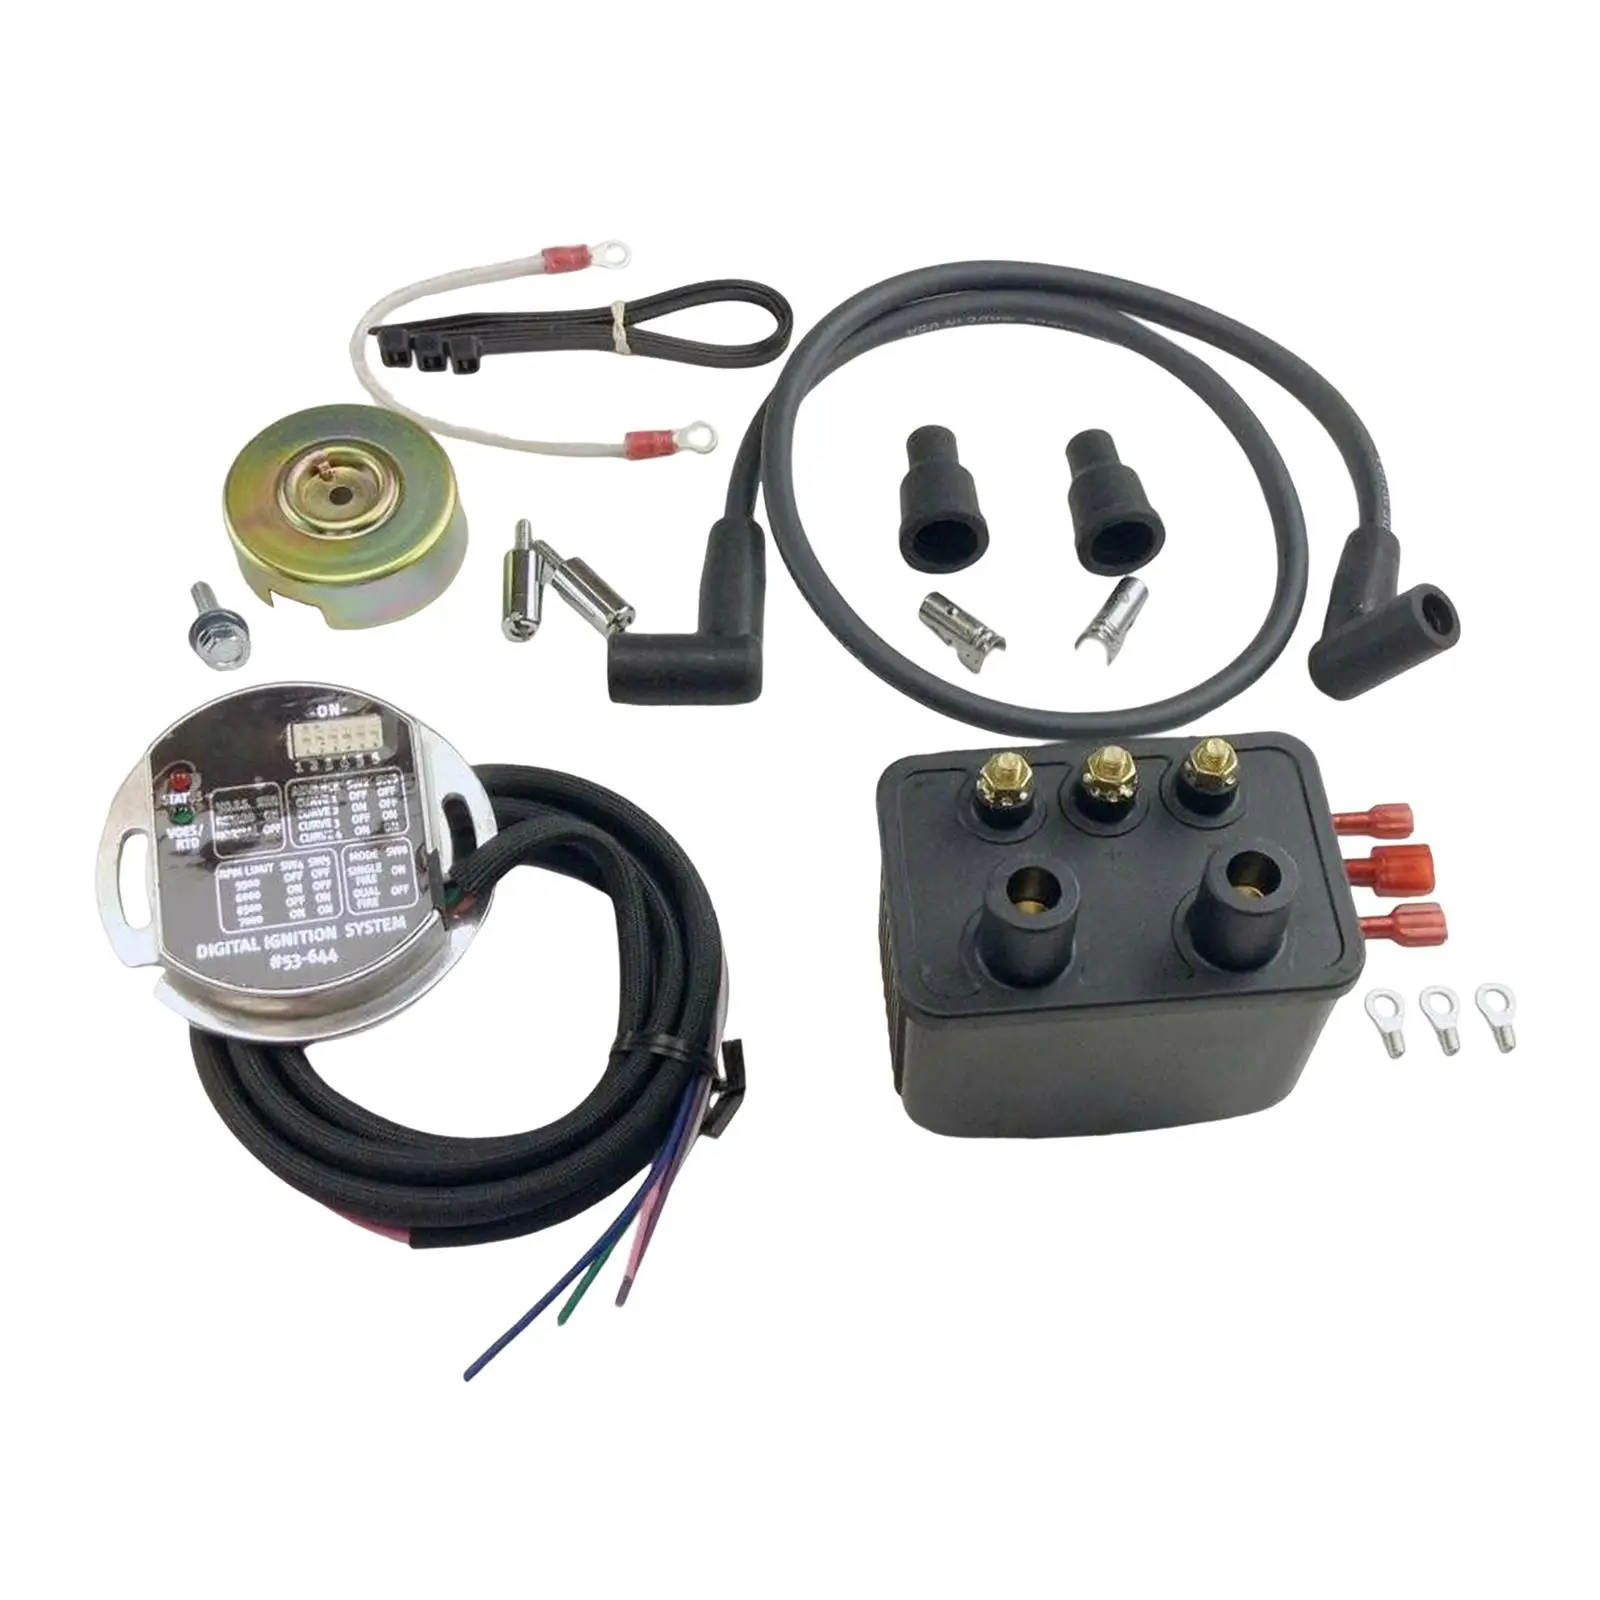 Single Fire Ignition Kit Replaces for Harley Shovelhead Easy to Install